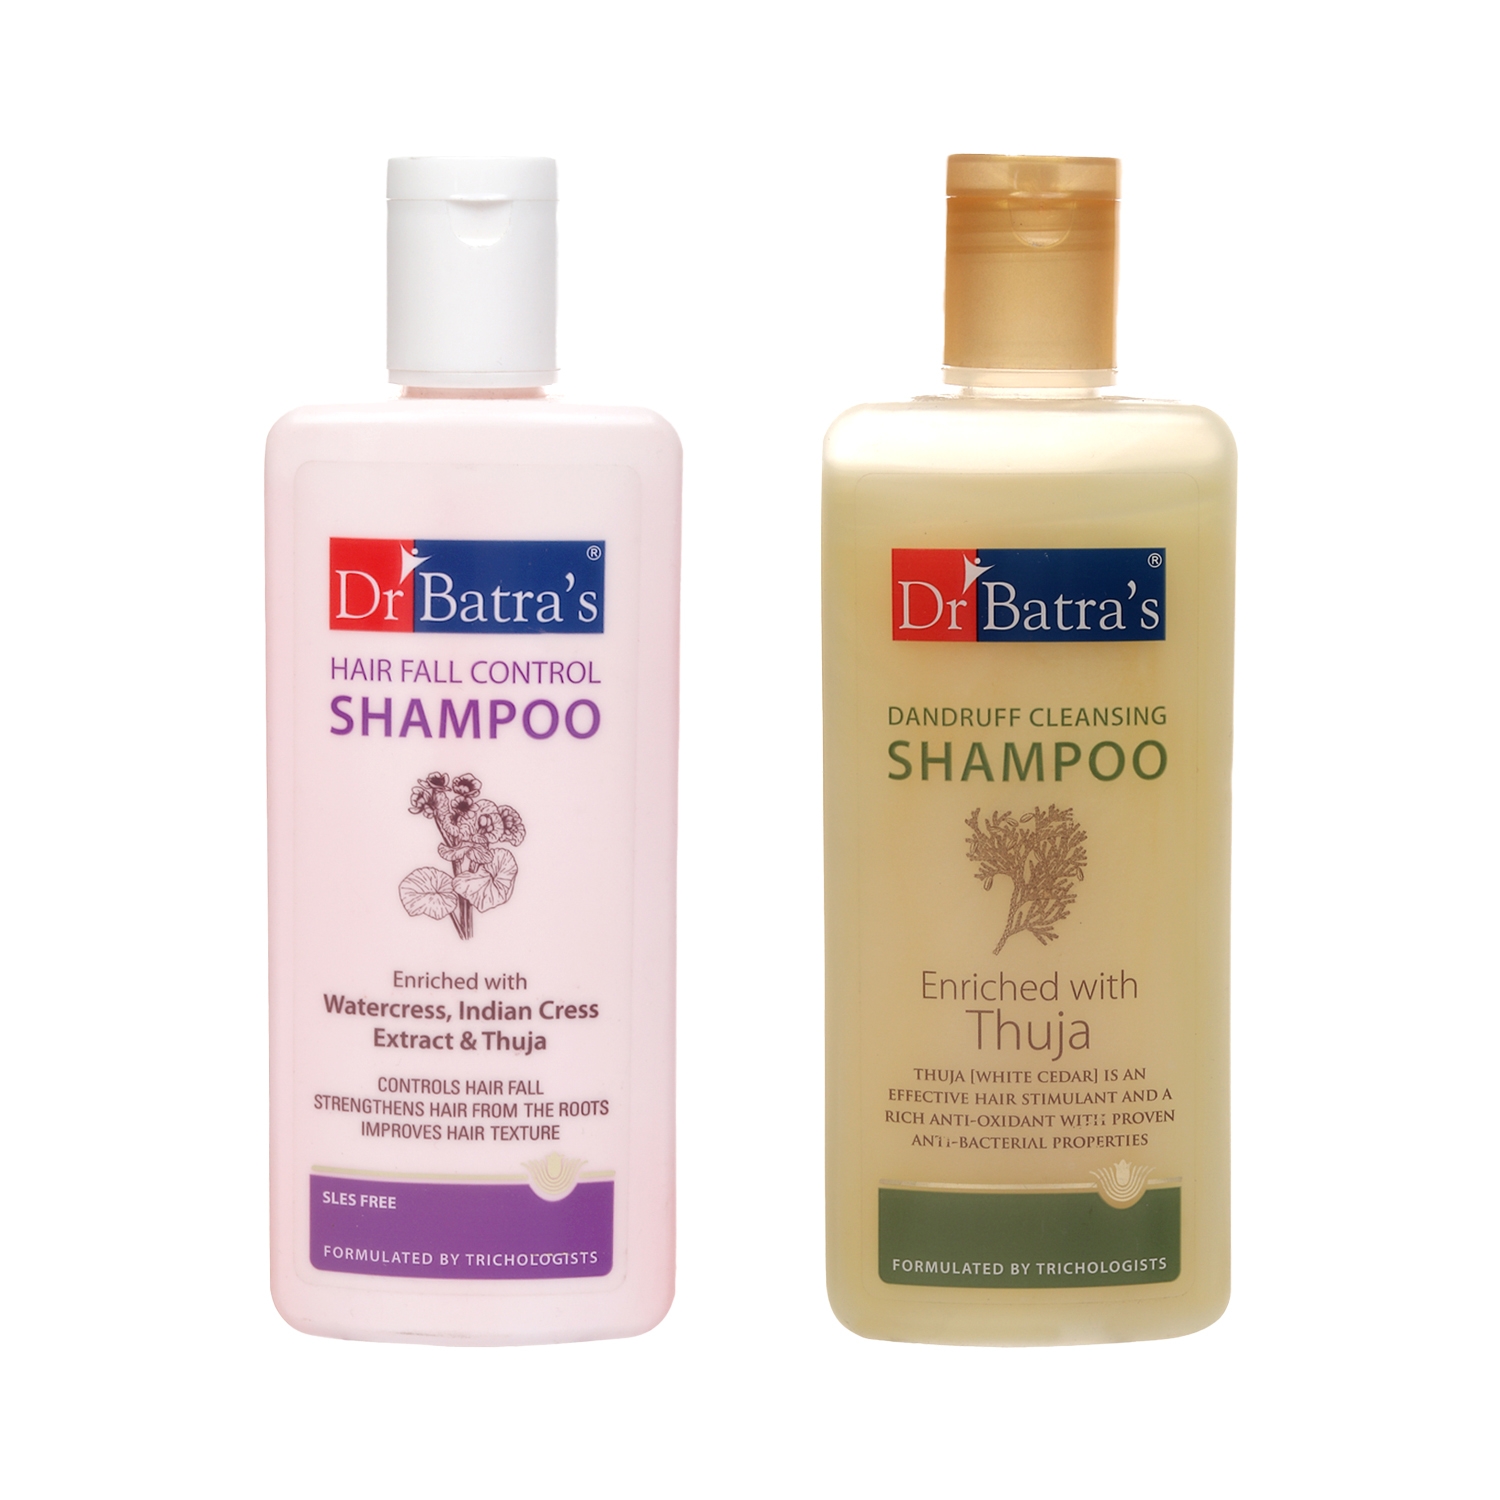 Dr Batra's | Dr Batra's Dandruff Cleansing Shampoo - 200 ml and HairFall Control Shampoo- 200ml (Pack of 2 for Men and Women)